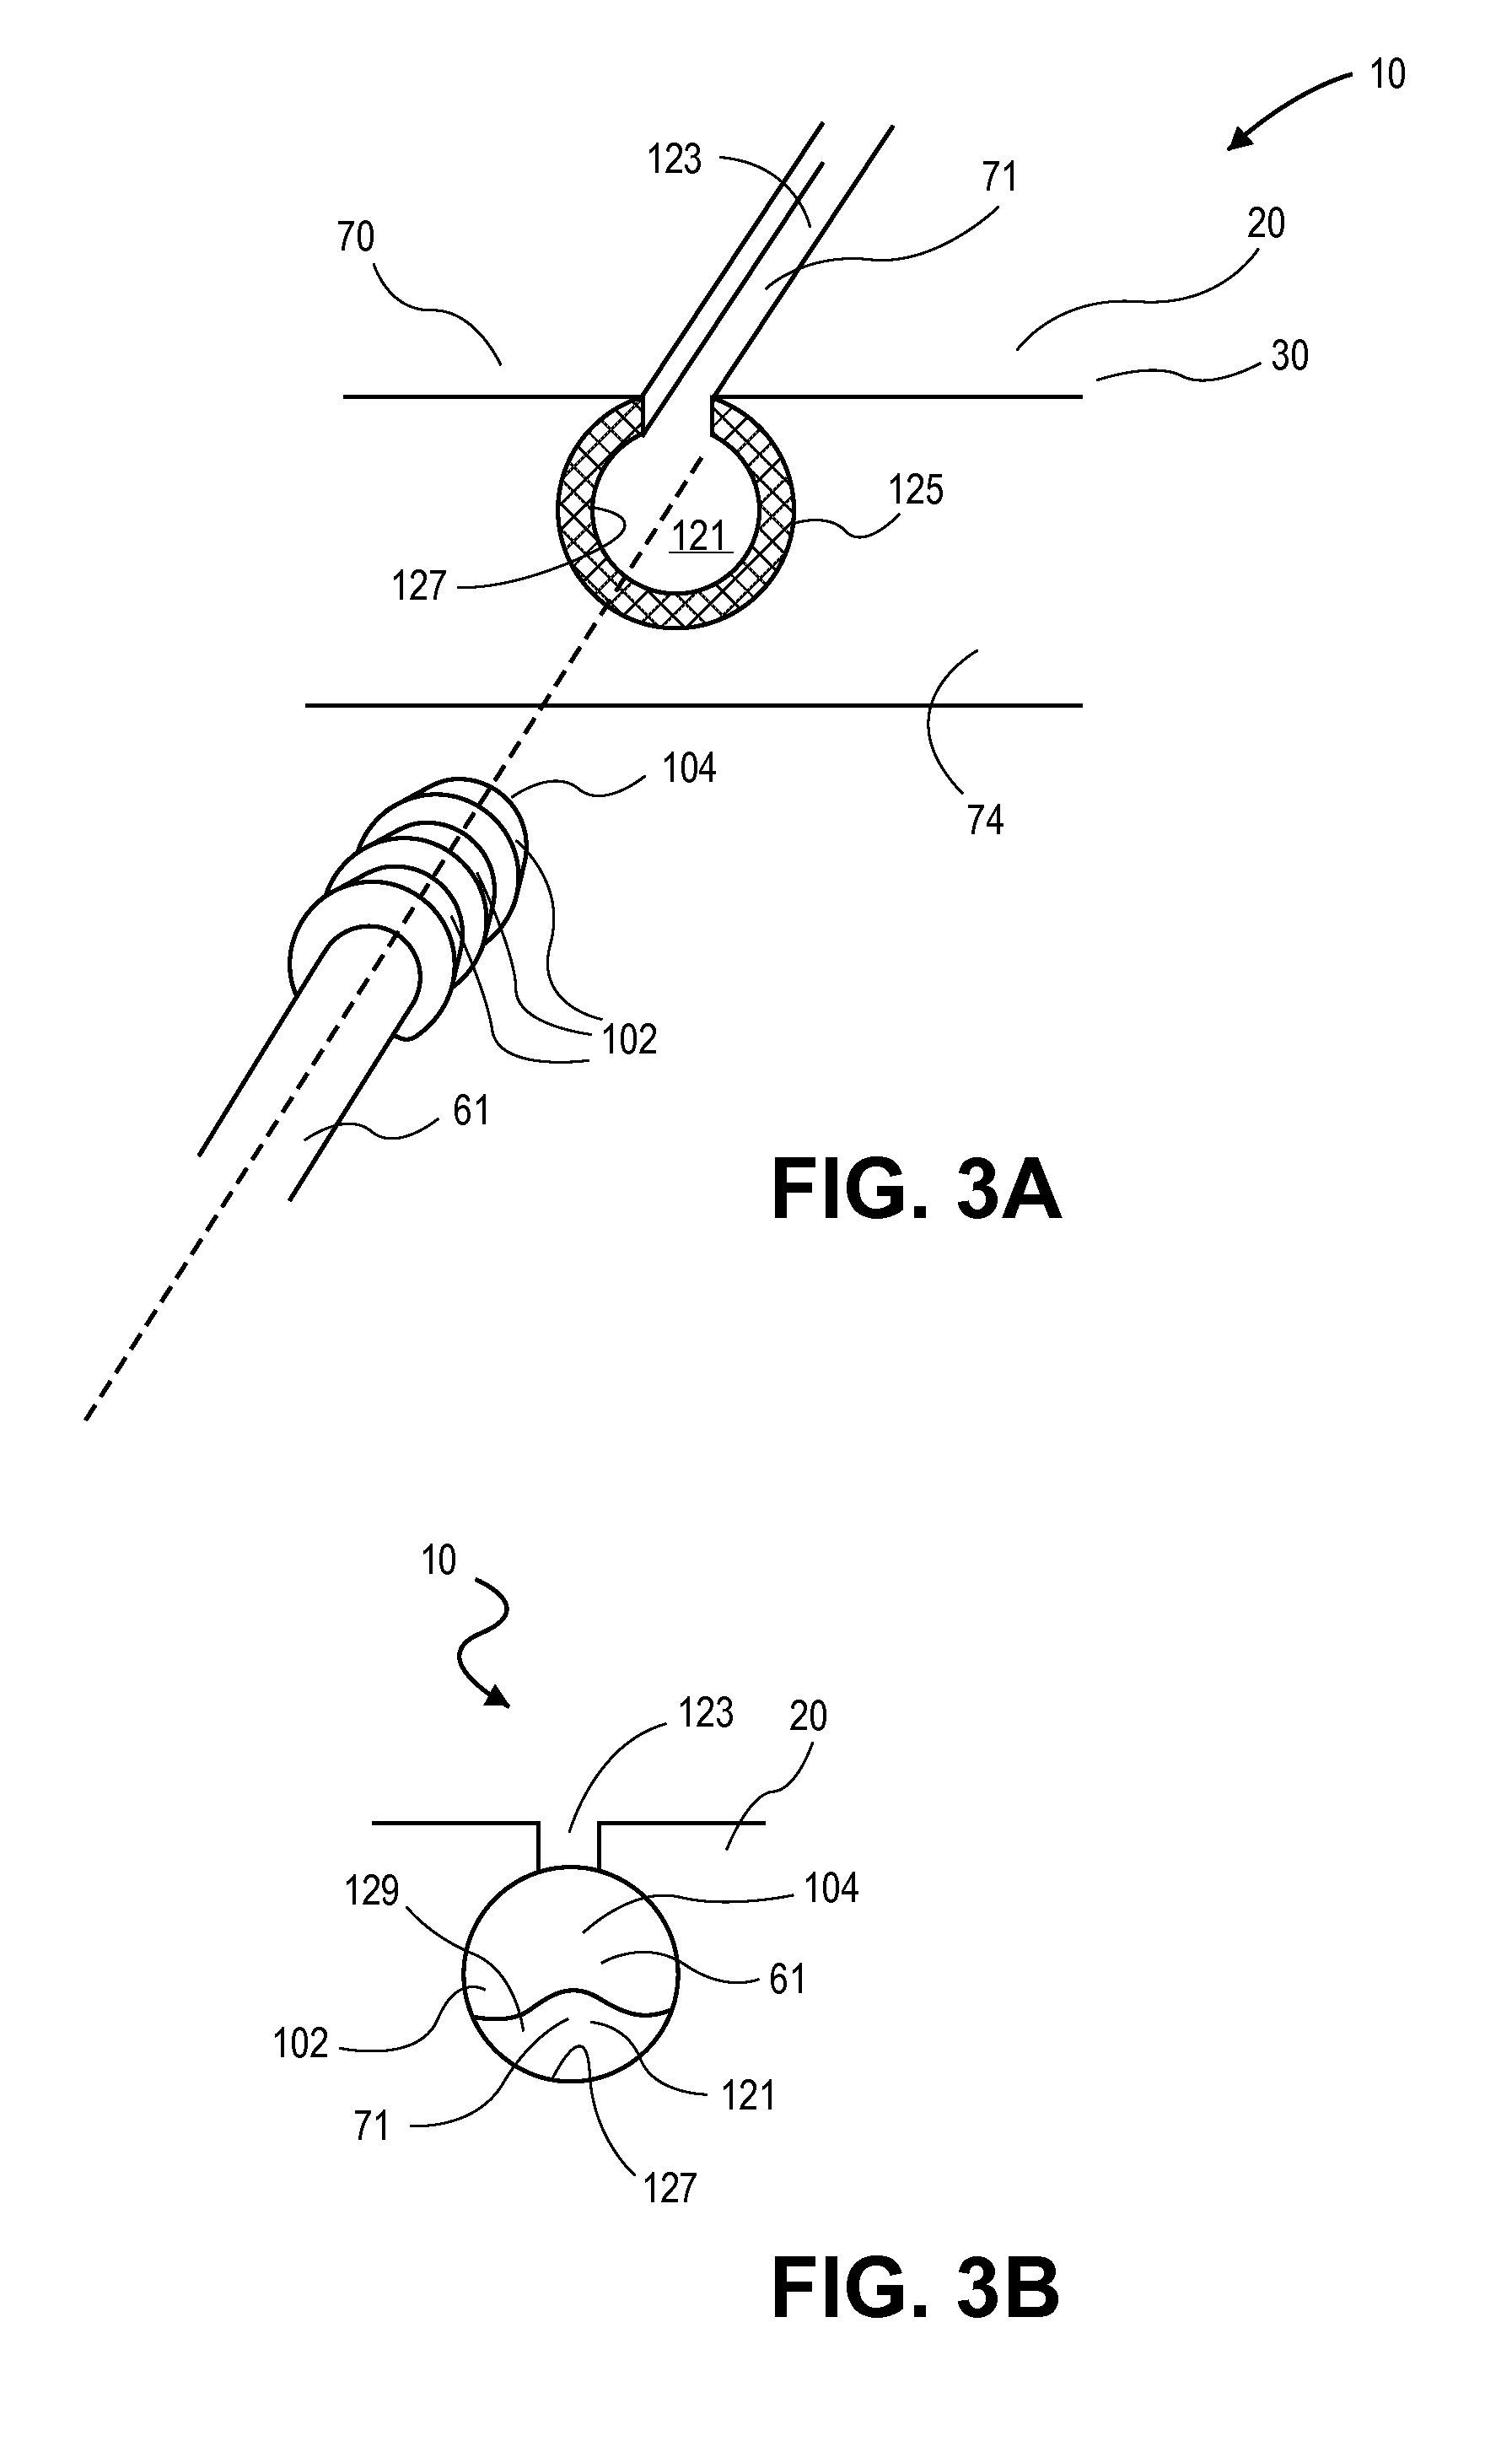 Mouthguard apparatus and related method